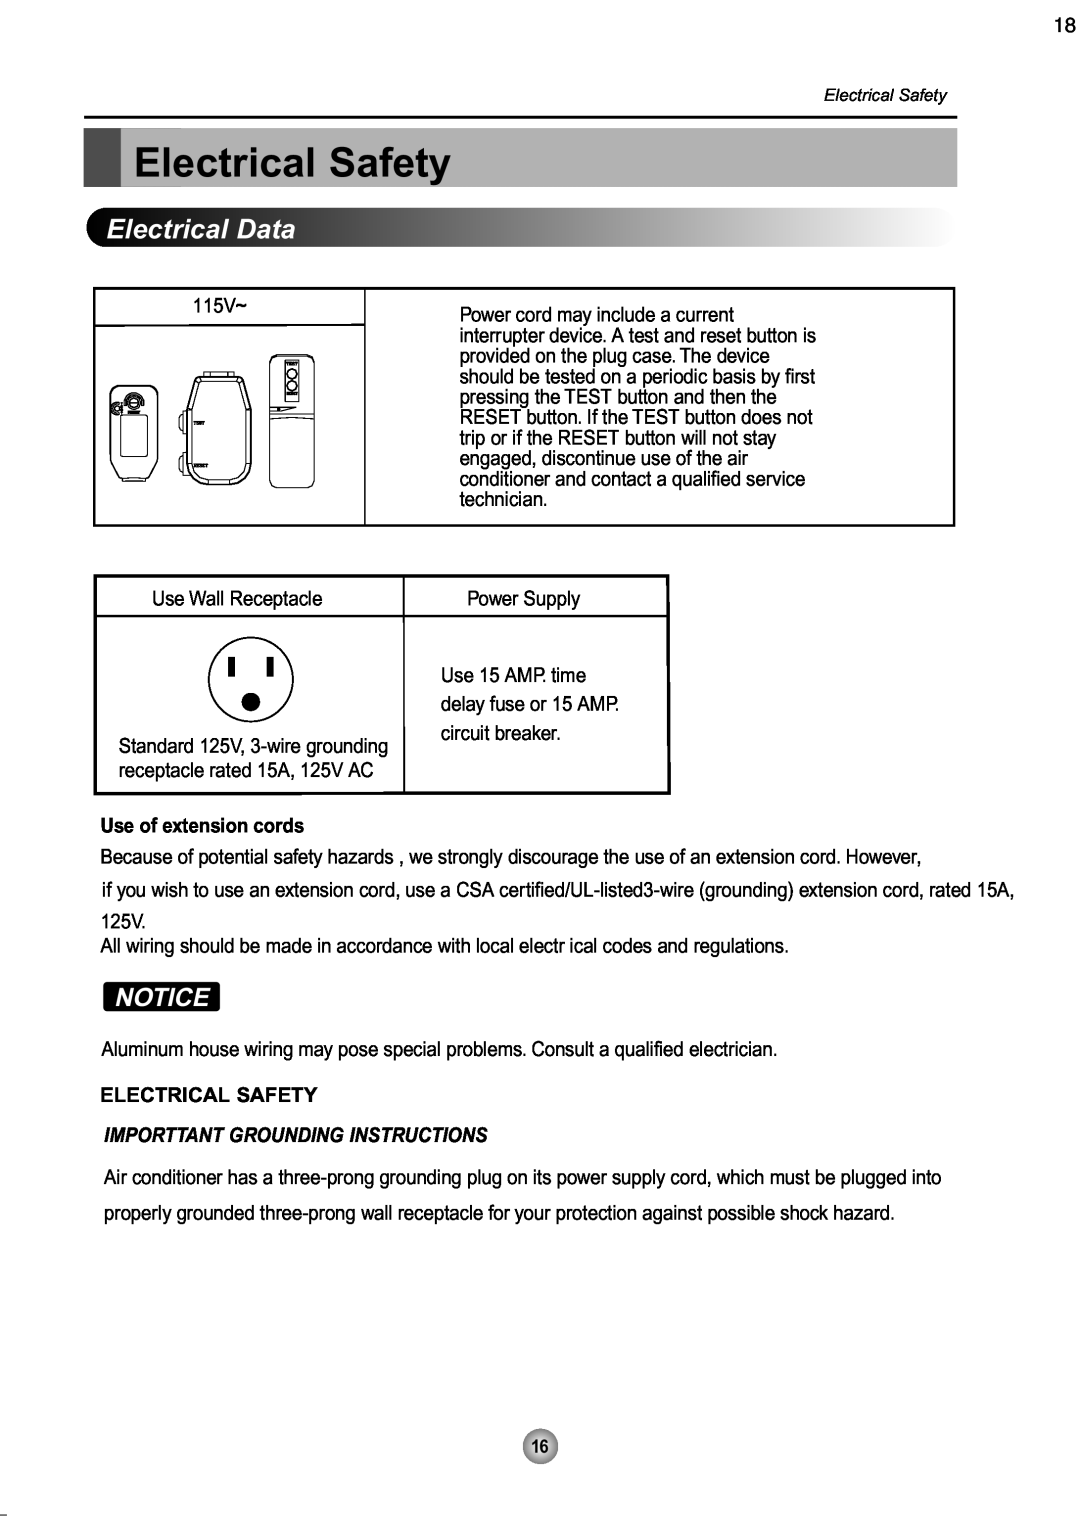 Friedrich CP08 Electrical Safety, Electrical Data, 115V~, Use of extension cords, Importtant Grounding Instructions 